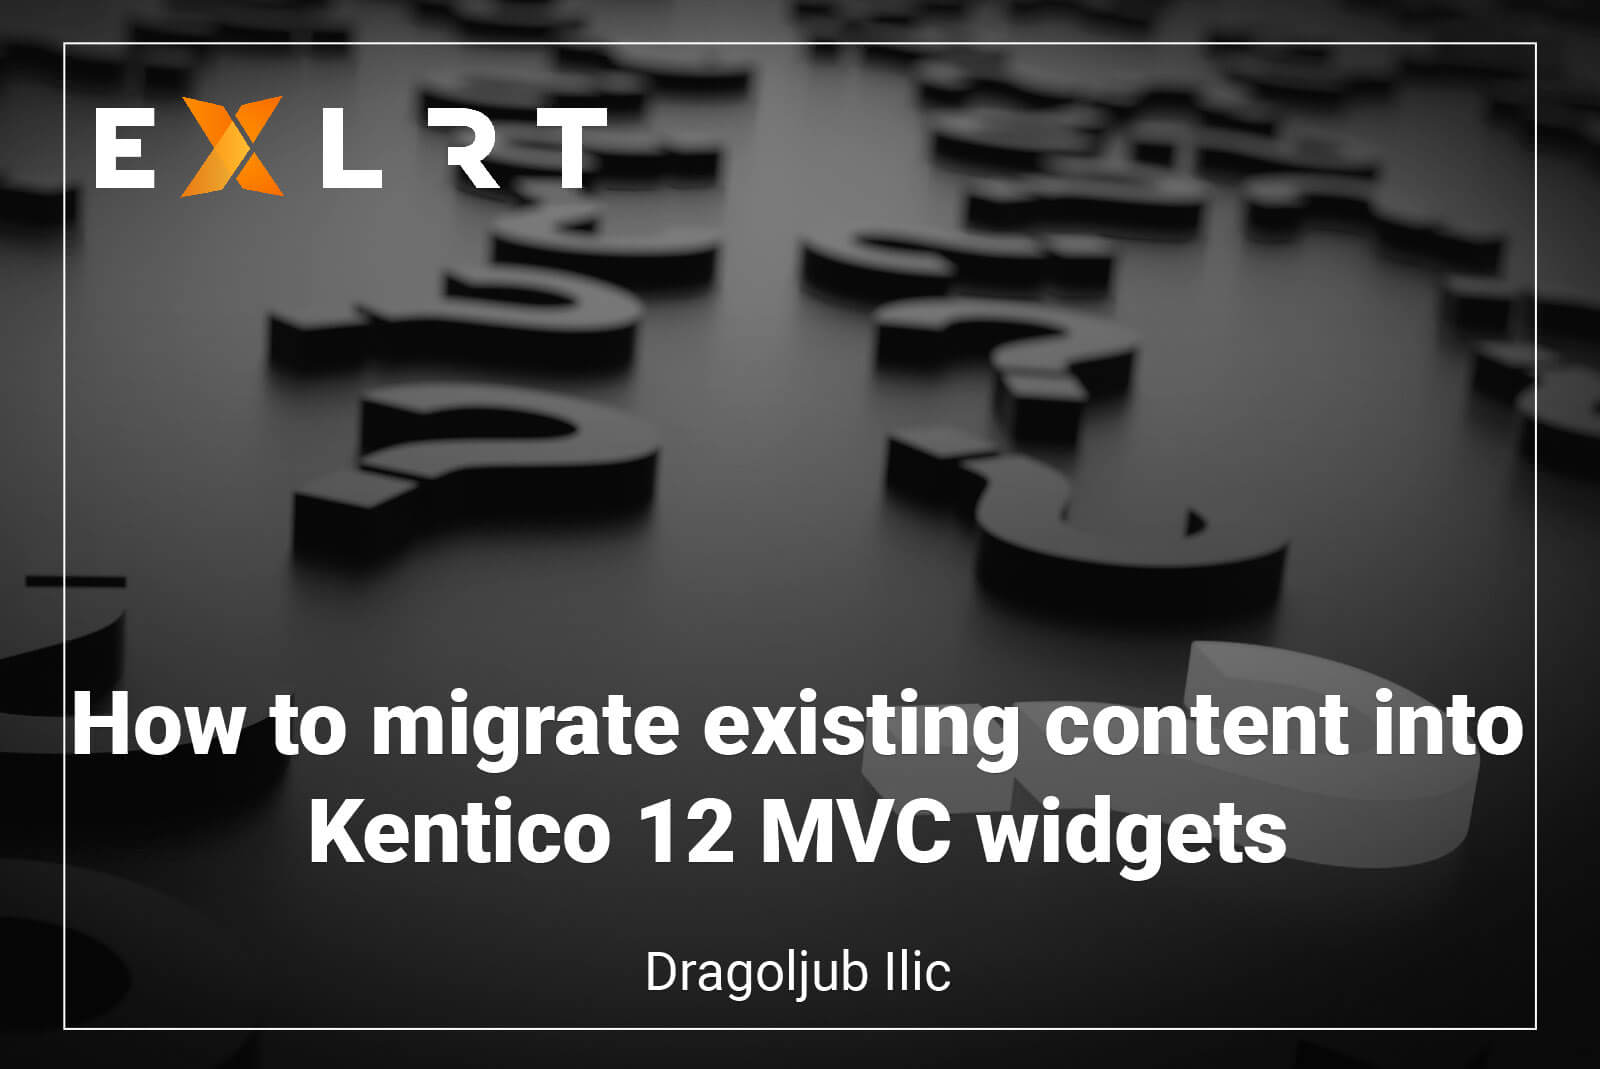 How to migrate existing content into Kentico 12 MVC widgets